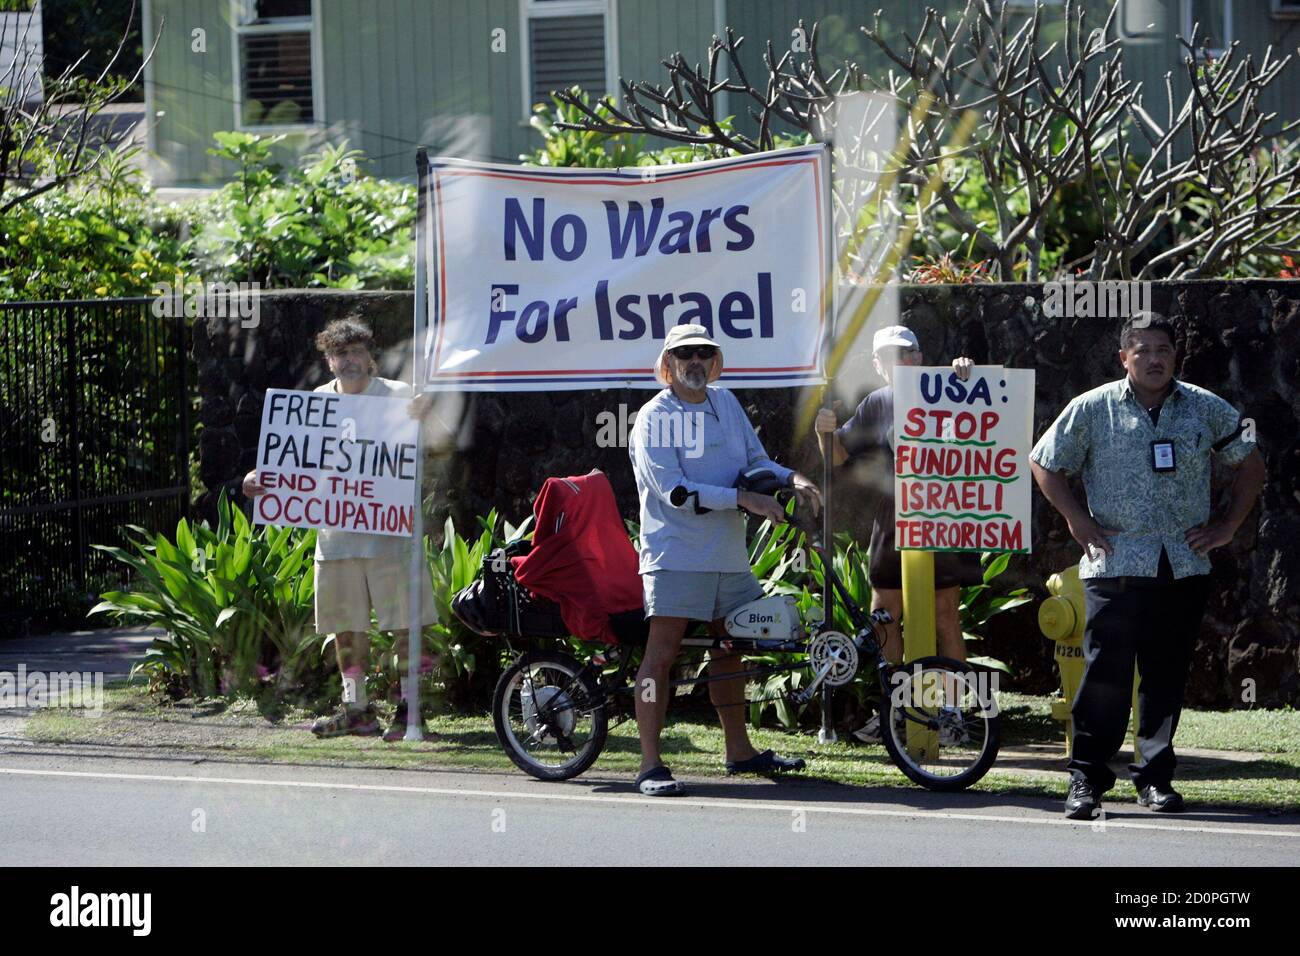 Protesters hold signs supporting Palestine as U.S. President Barack Obama's motorcade leaves the compound where he and his family are staying while on Christmas vacation in Hawaii in Kailua, Hawaii January 1, 2011. Picture shot through glass. REUTERS/Hugh Gentry (UNITED STATES - Tags: POLITICS CIVIL UNREST) Stock Photo